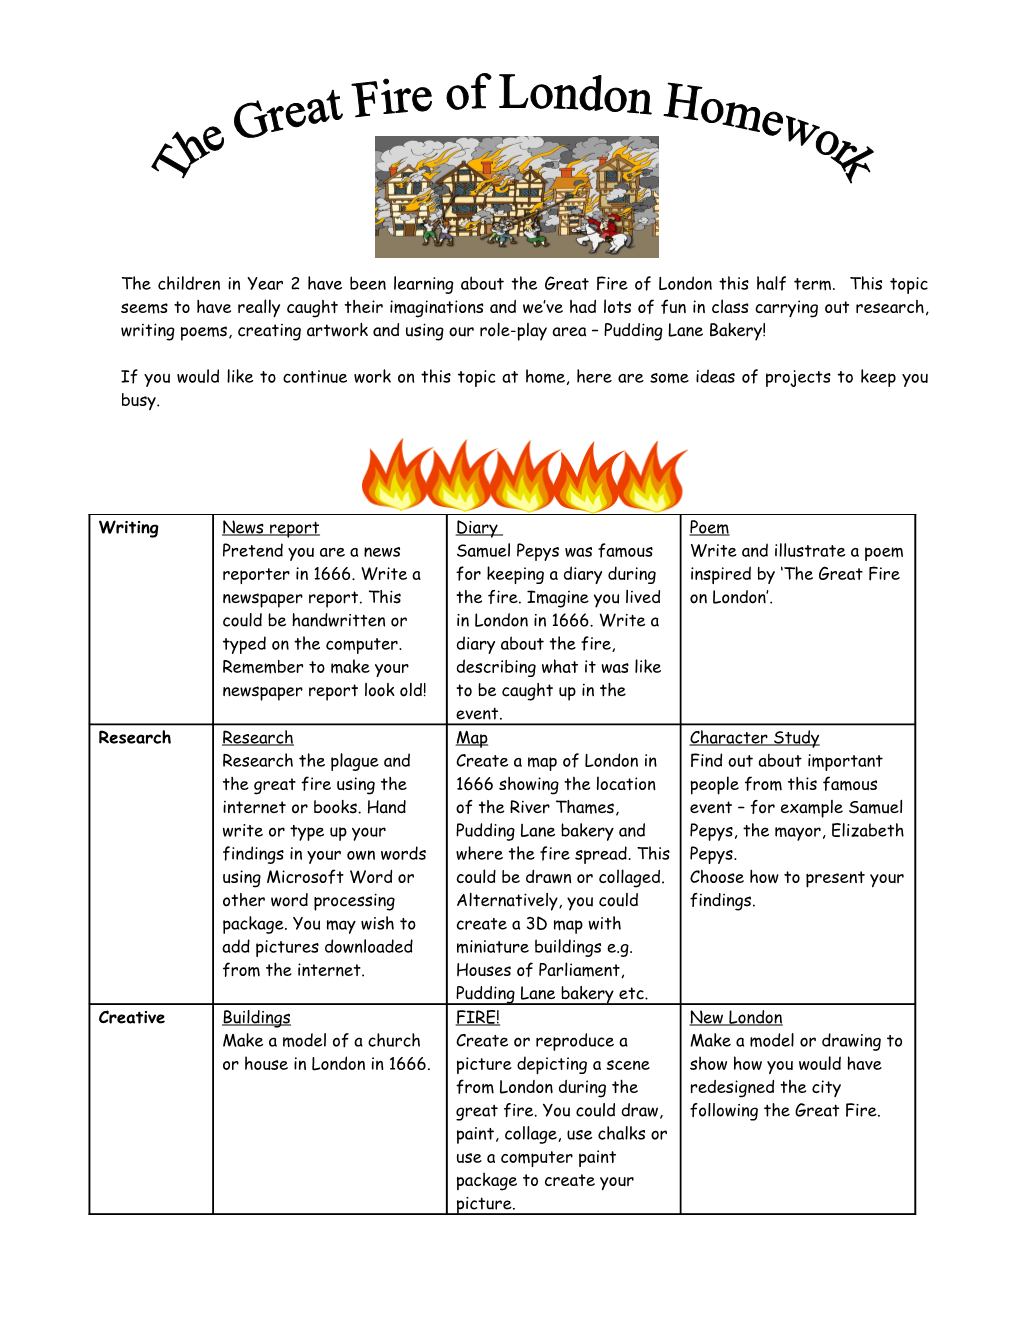 Y2 the Great Fire of London Creative Homework Ideas